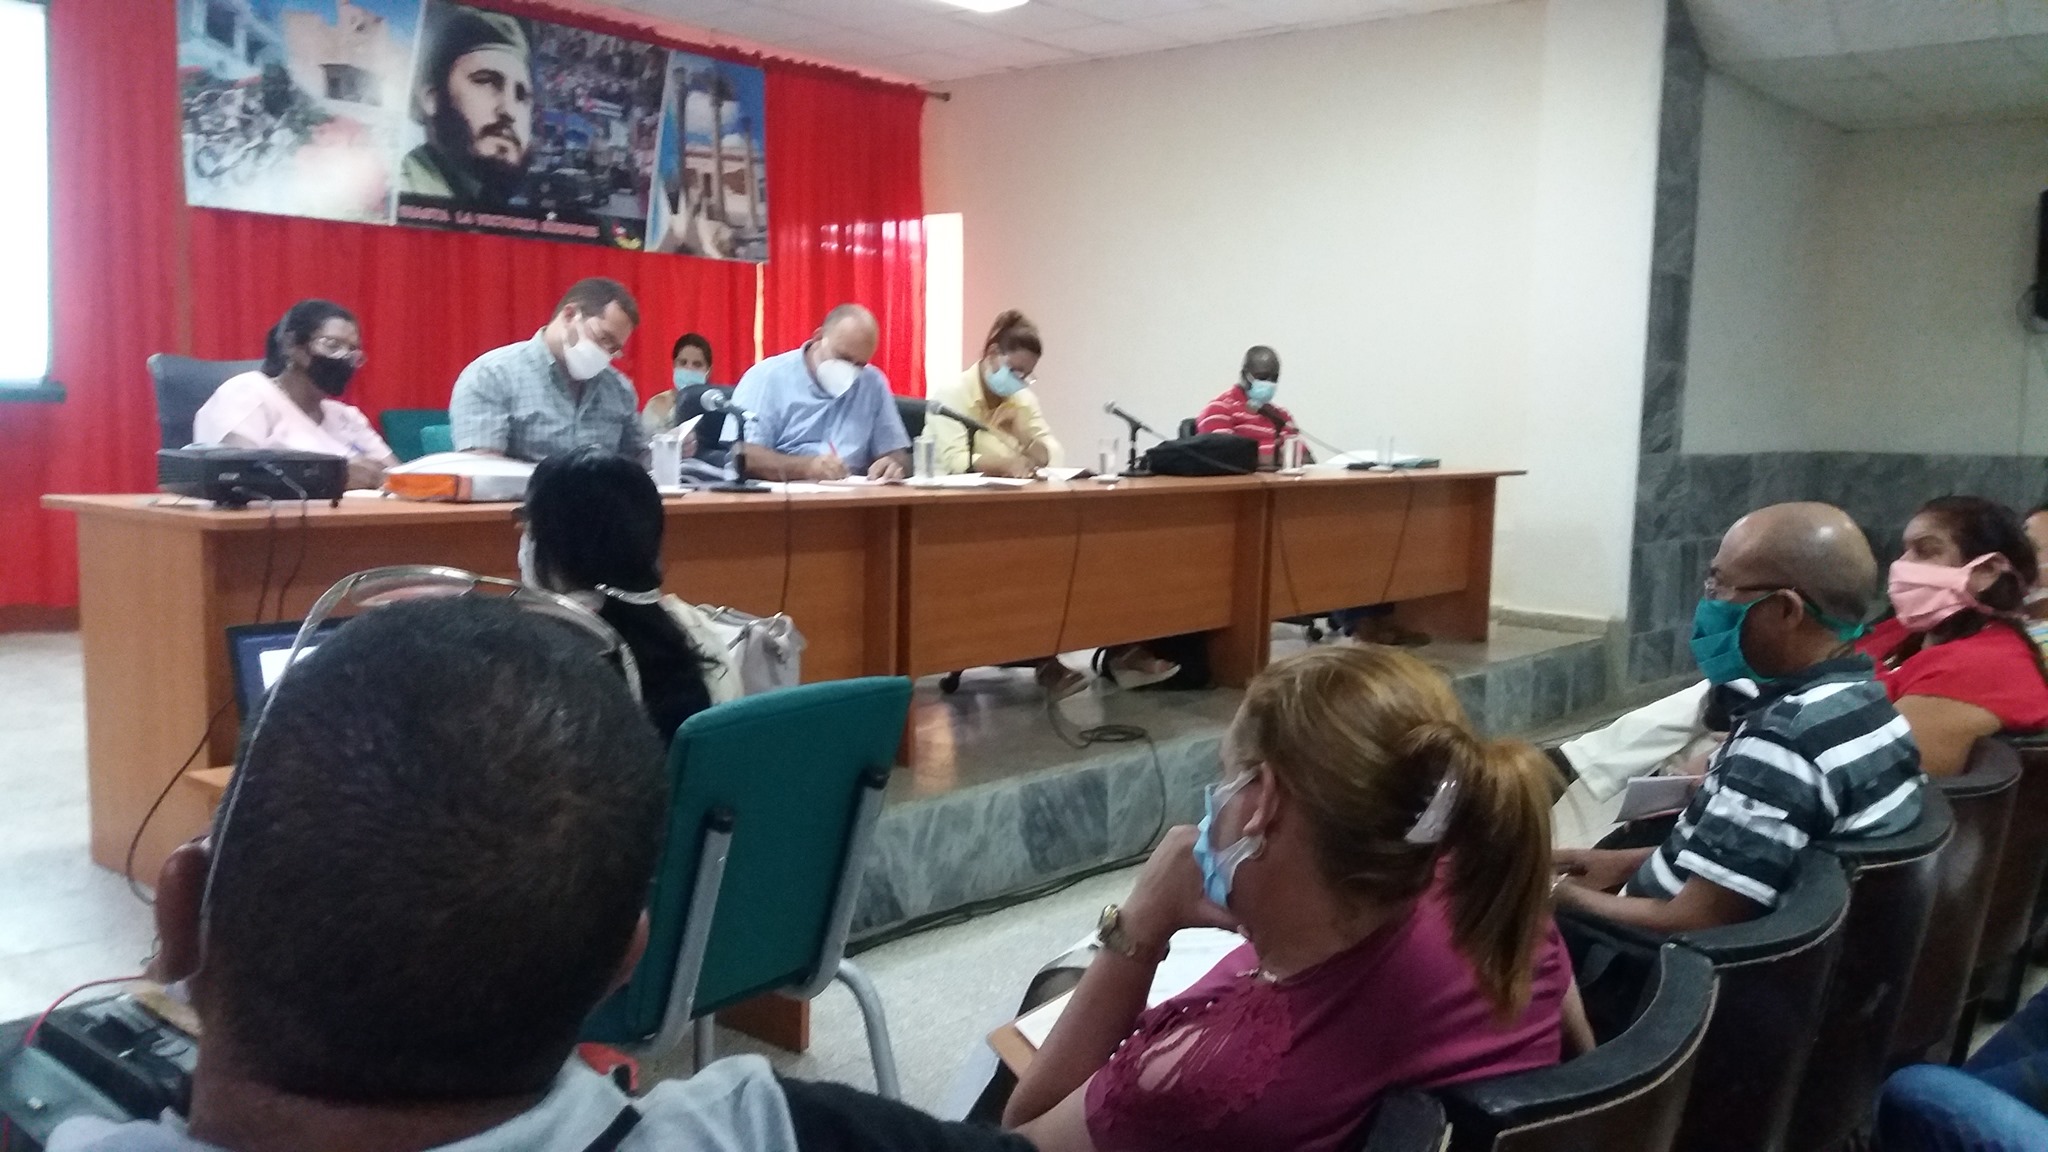 The Vice-minister Eugenio González Pérez and other officials checked the adopted strategies